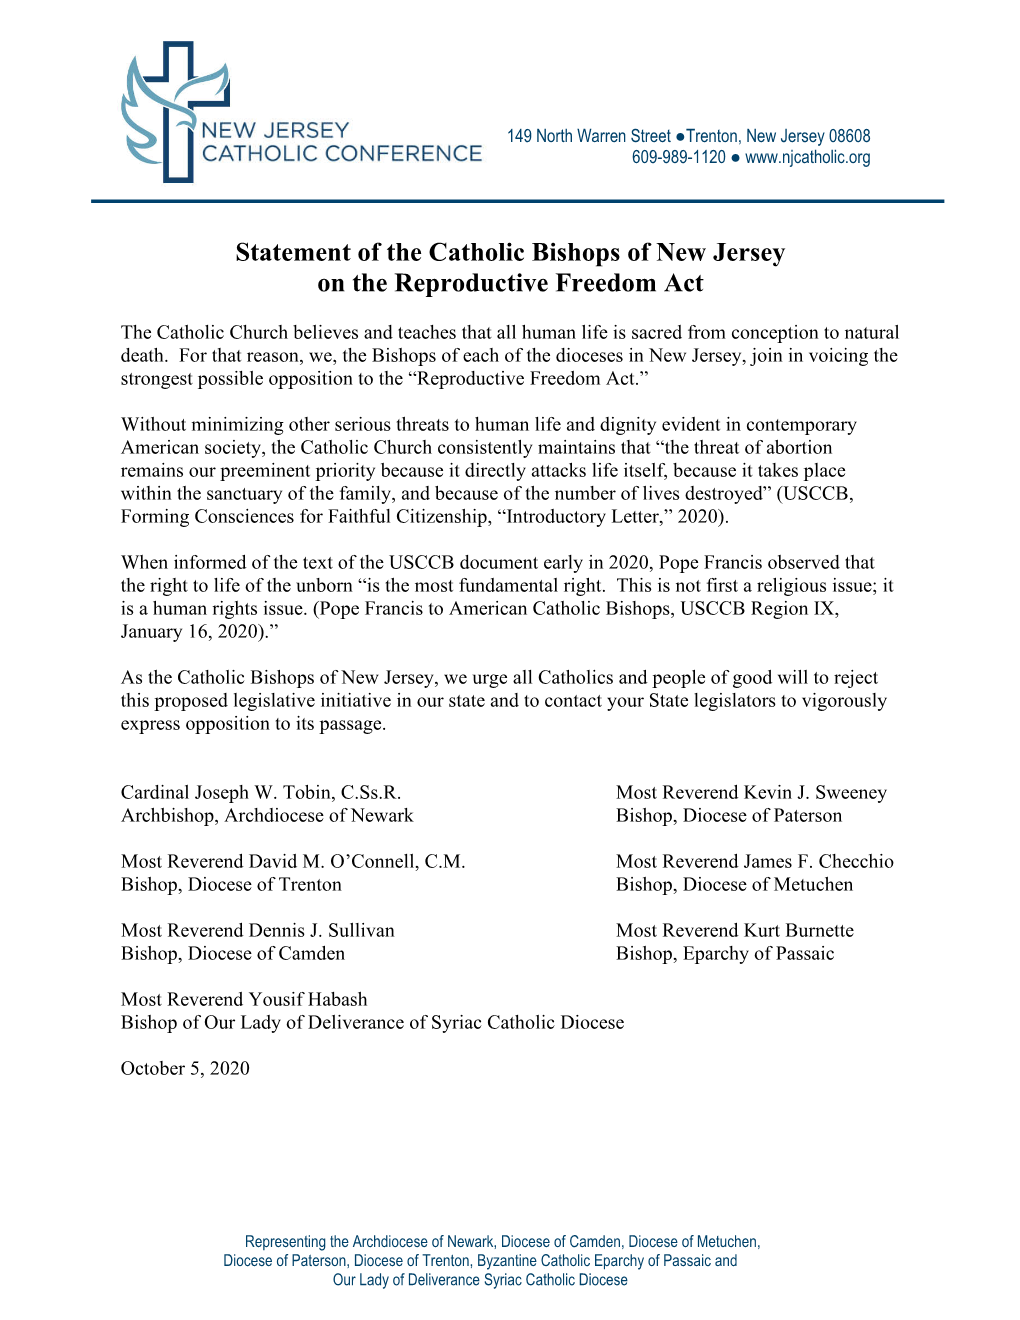 Statement of the Catholic Bishops of New Jersey on the Reproductive Freedom Act